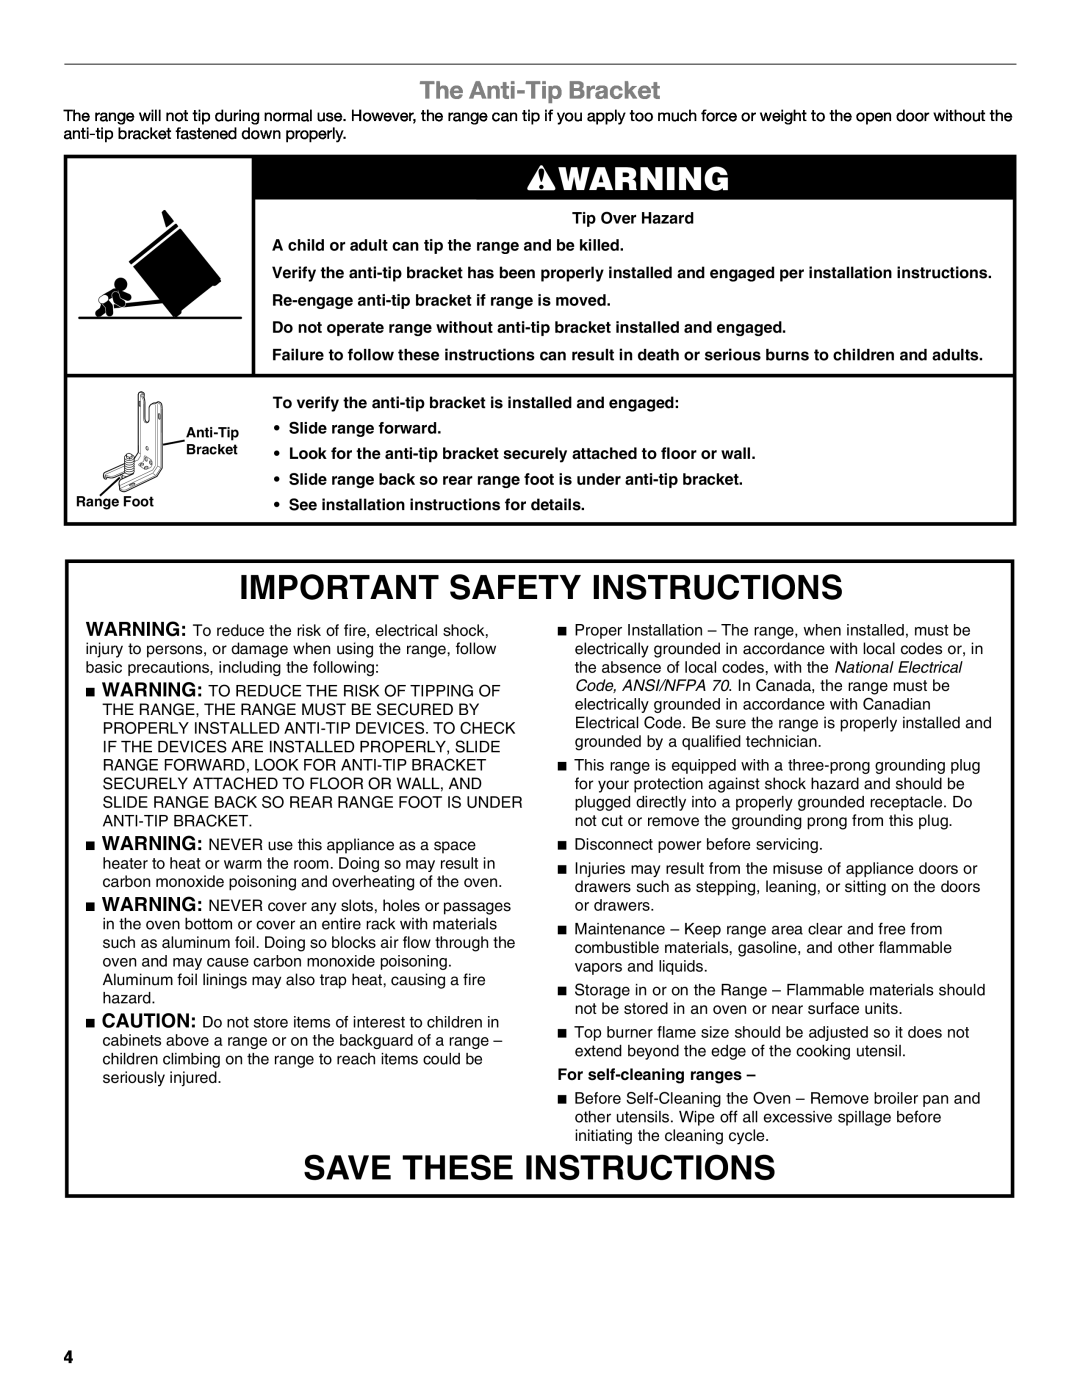 Whirlpool GGG390LX manual The Anti-Tip Bracket, Important Safety Instructions, Save These Instructions, Slide range forward 